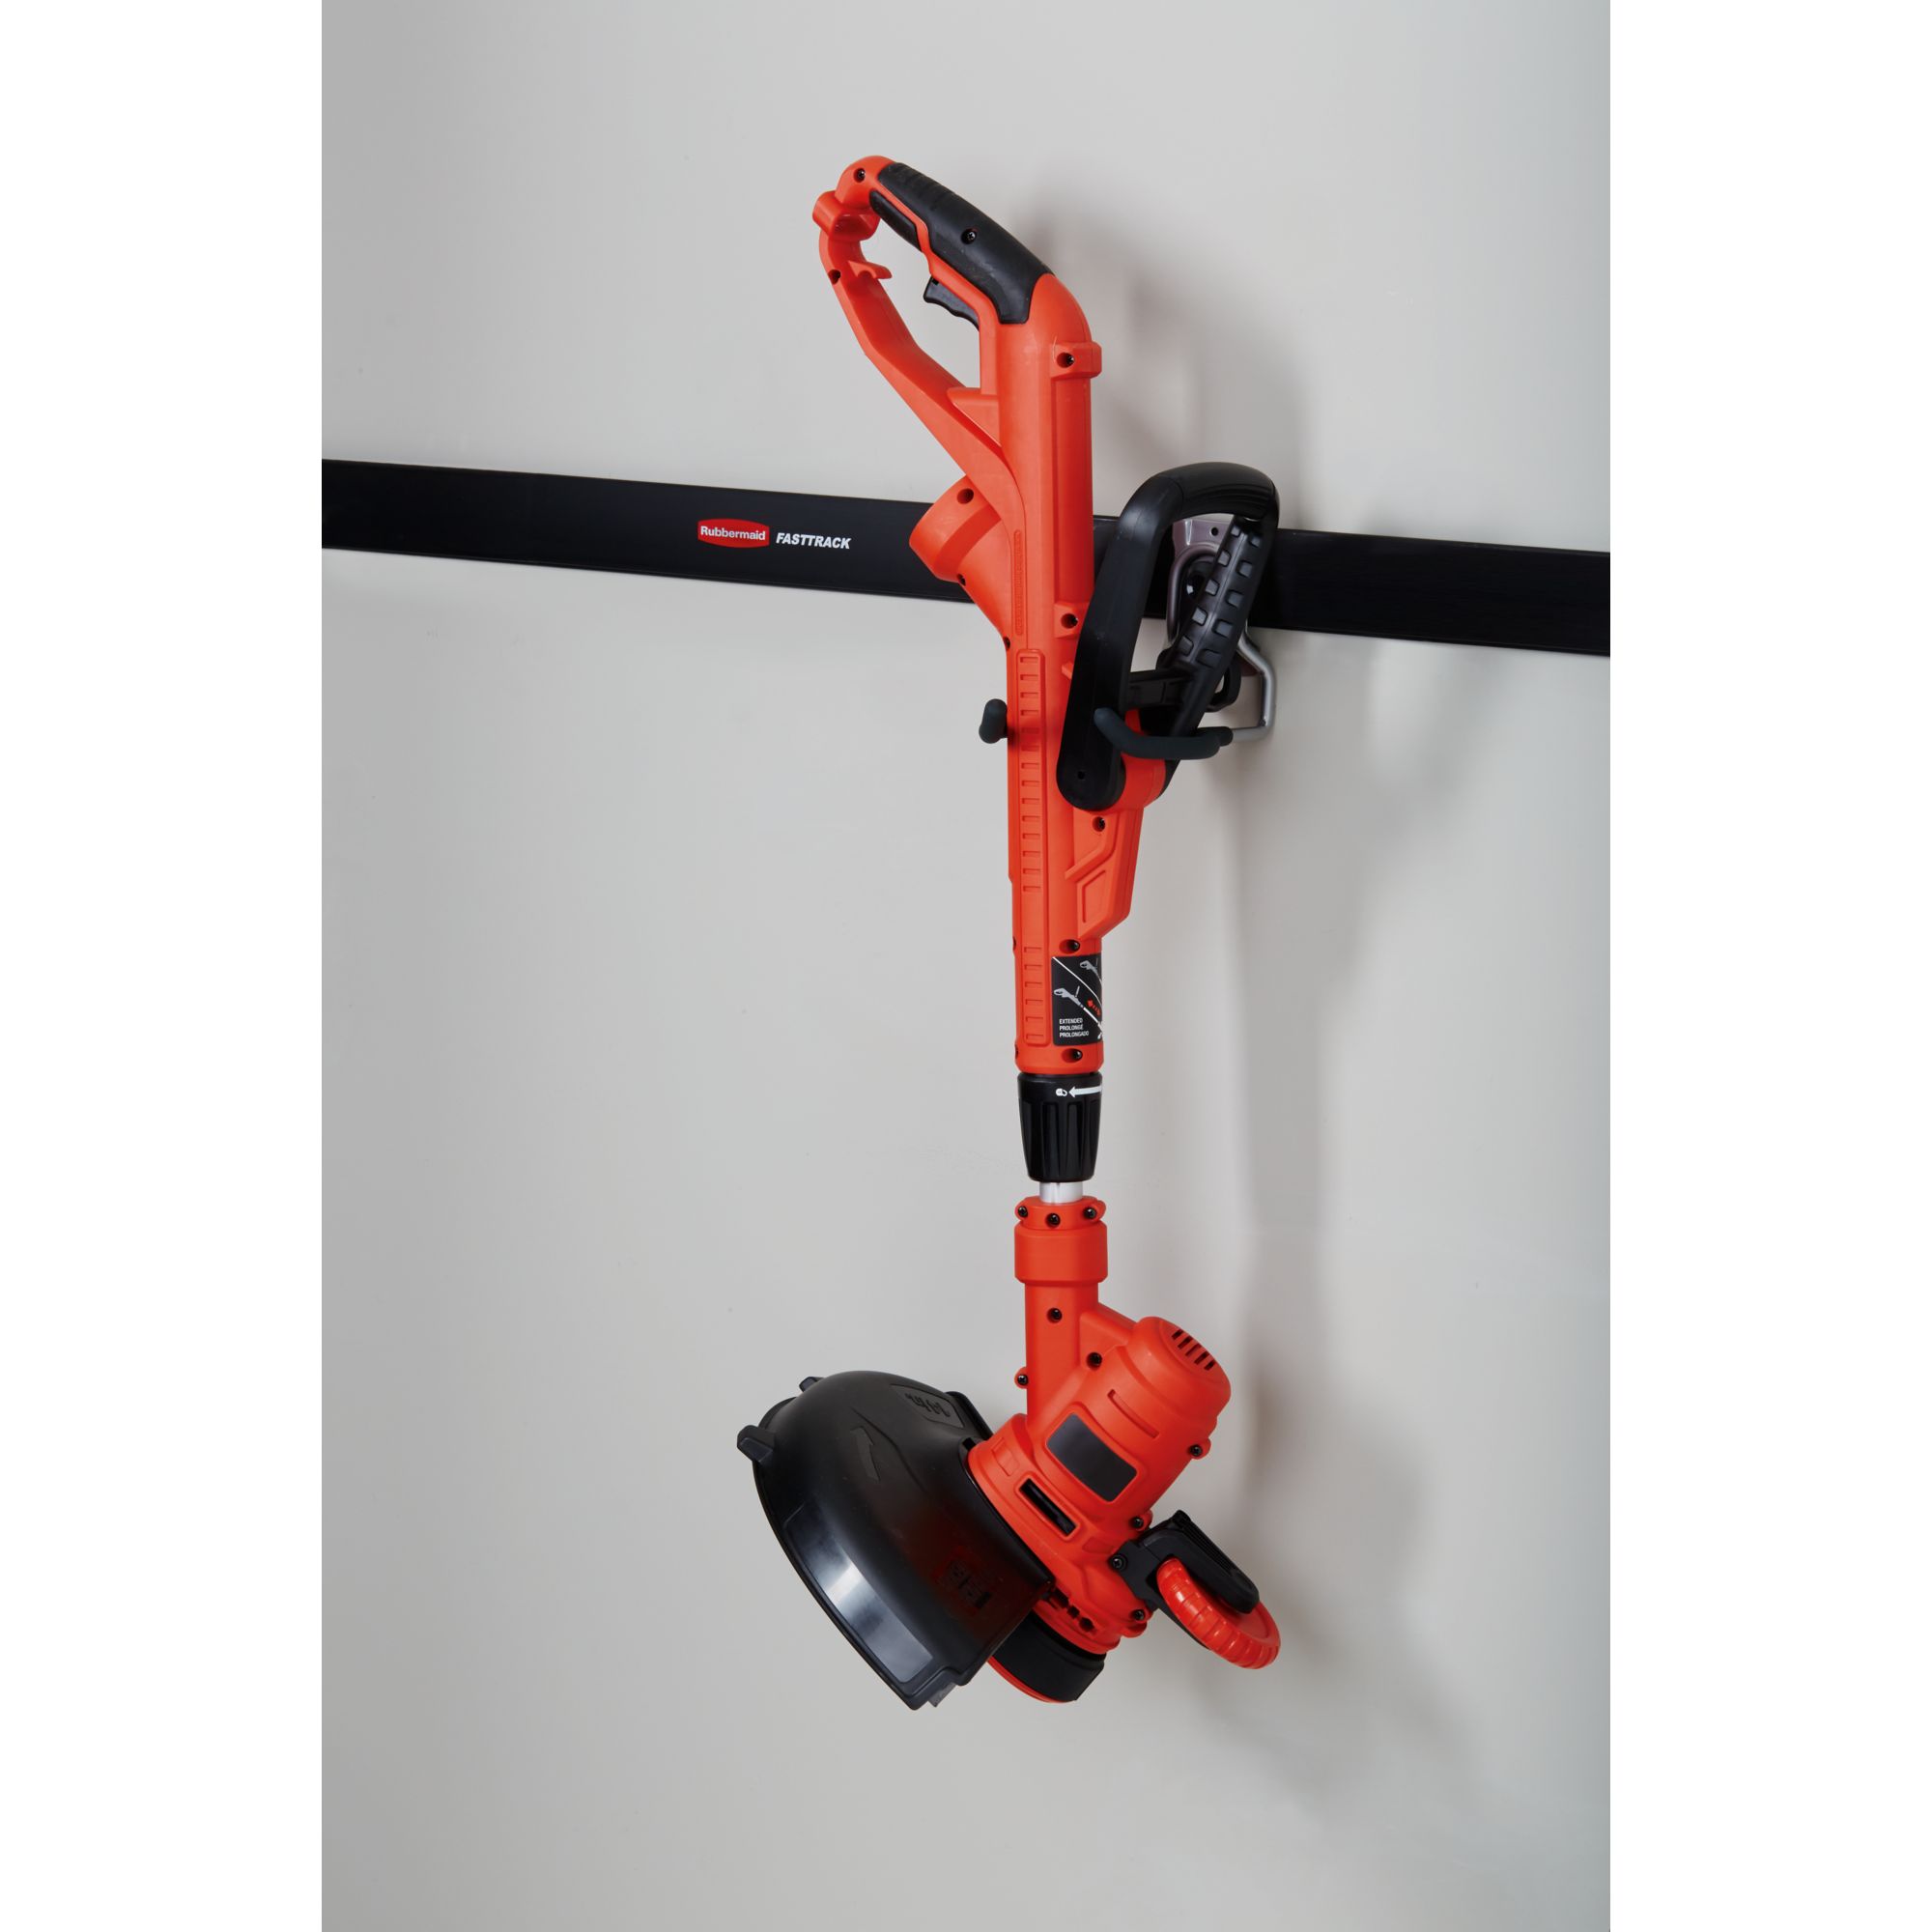 Rubbermaid Garage FastTrack Power Tool Holder, Wall Mounted Storage System,  Holds up to 50 pounds